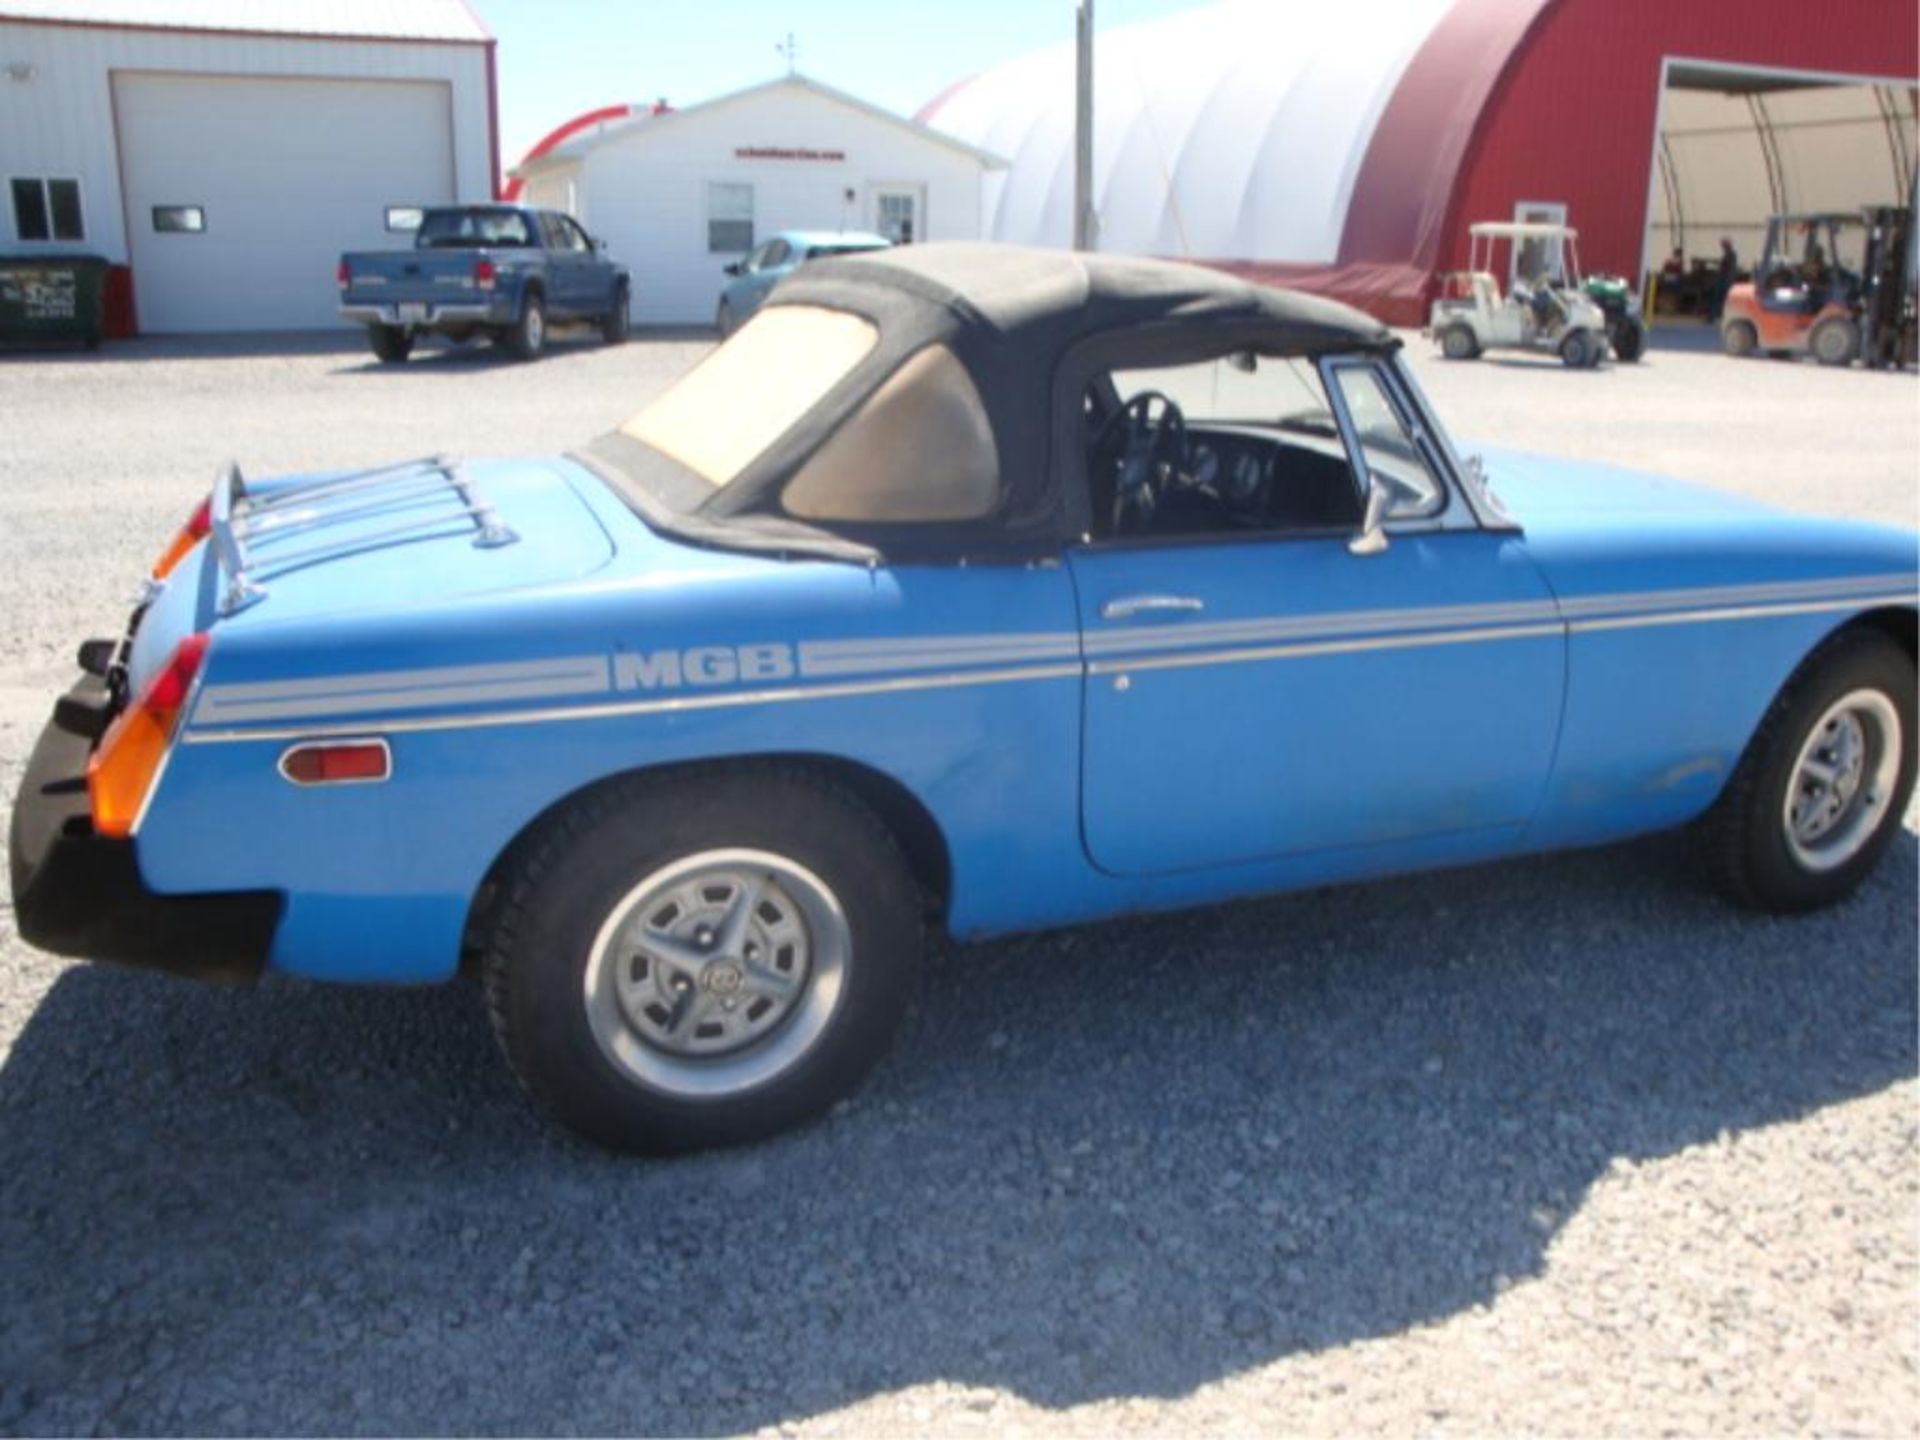 (Title) 1979 MGB, 14,890 miles on ODO,New in 2014: fuel pump, gas tank, clutch, radiator rodded - Image 14 of 34